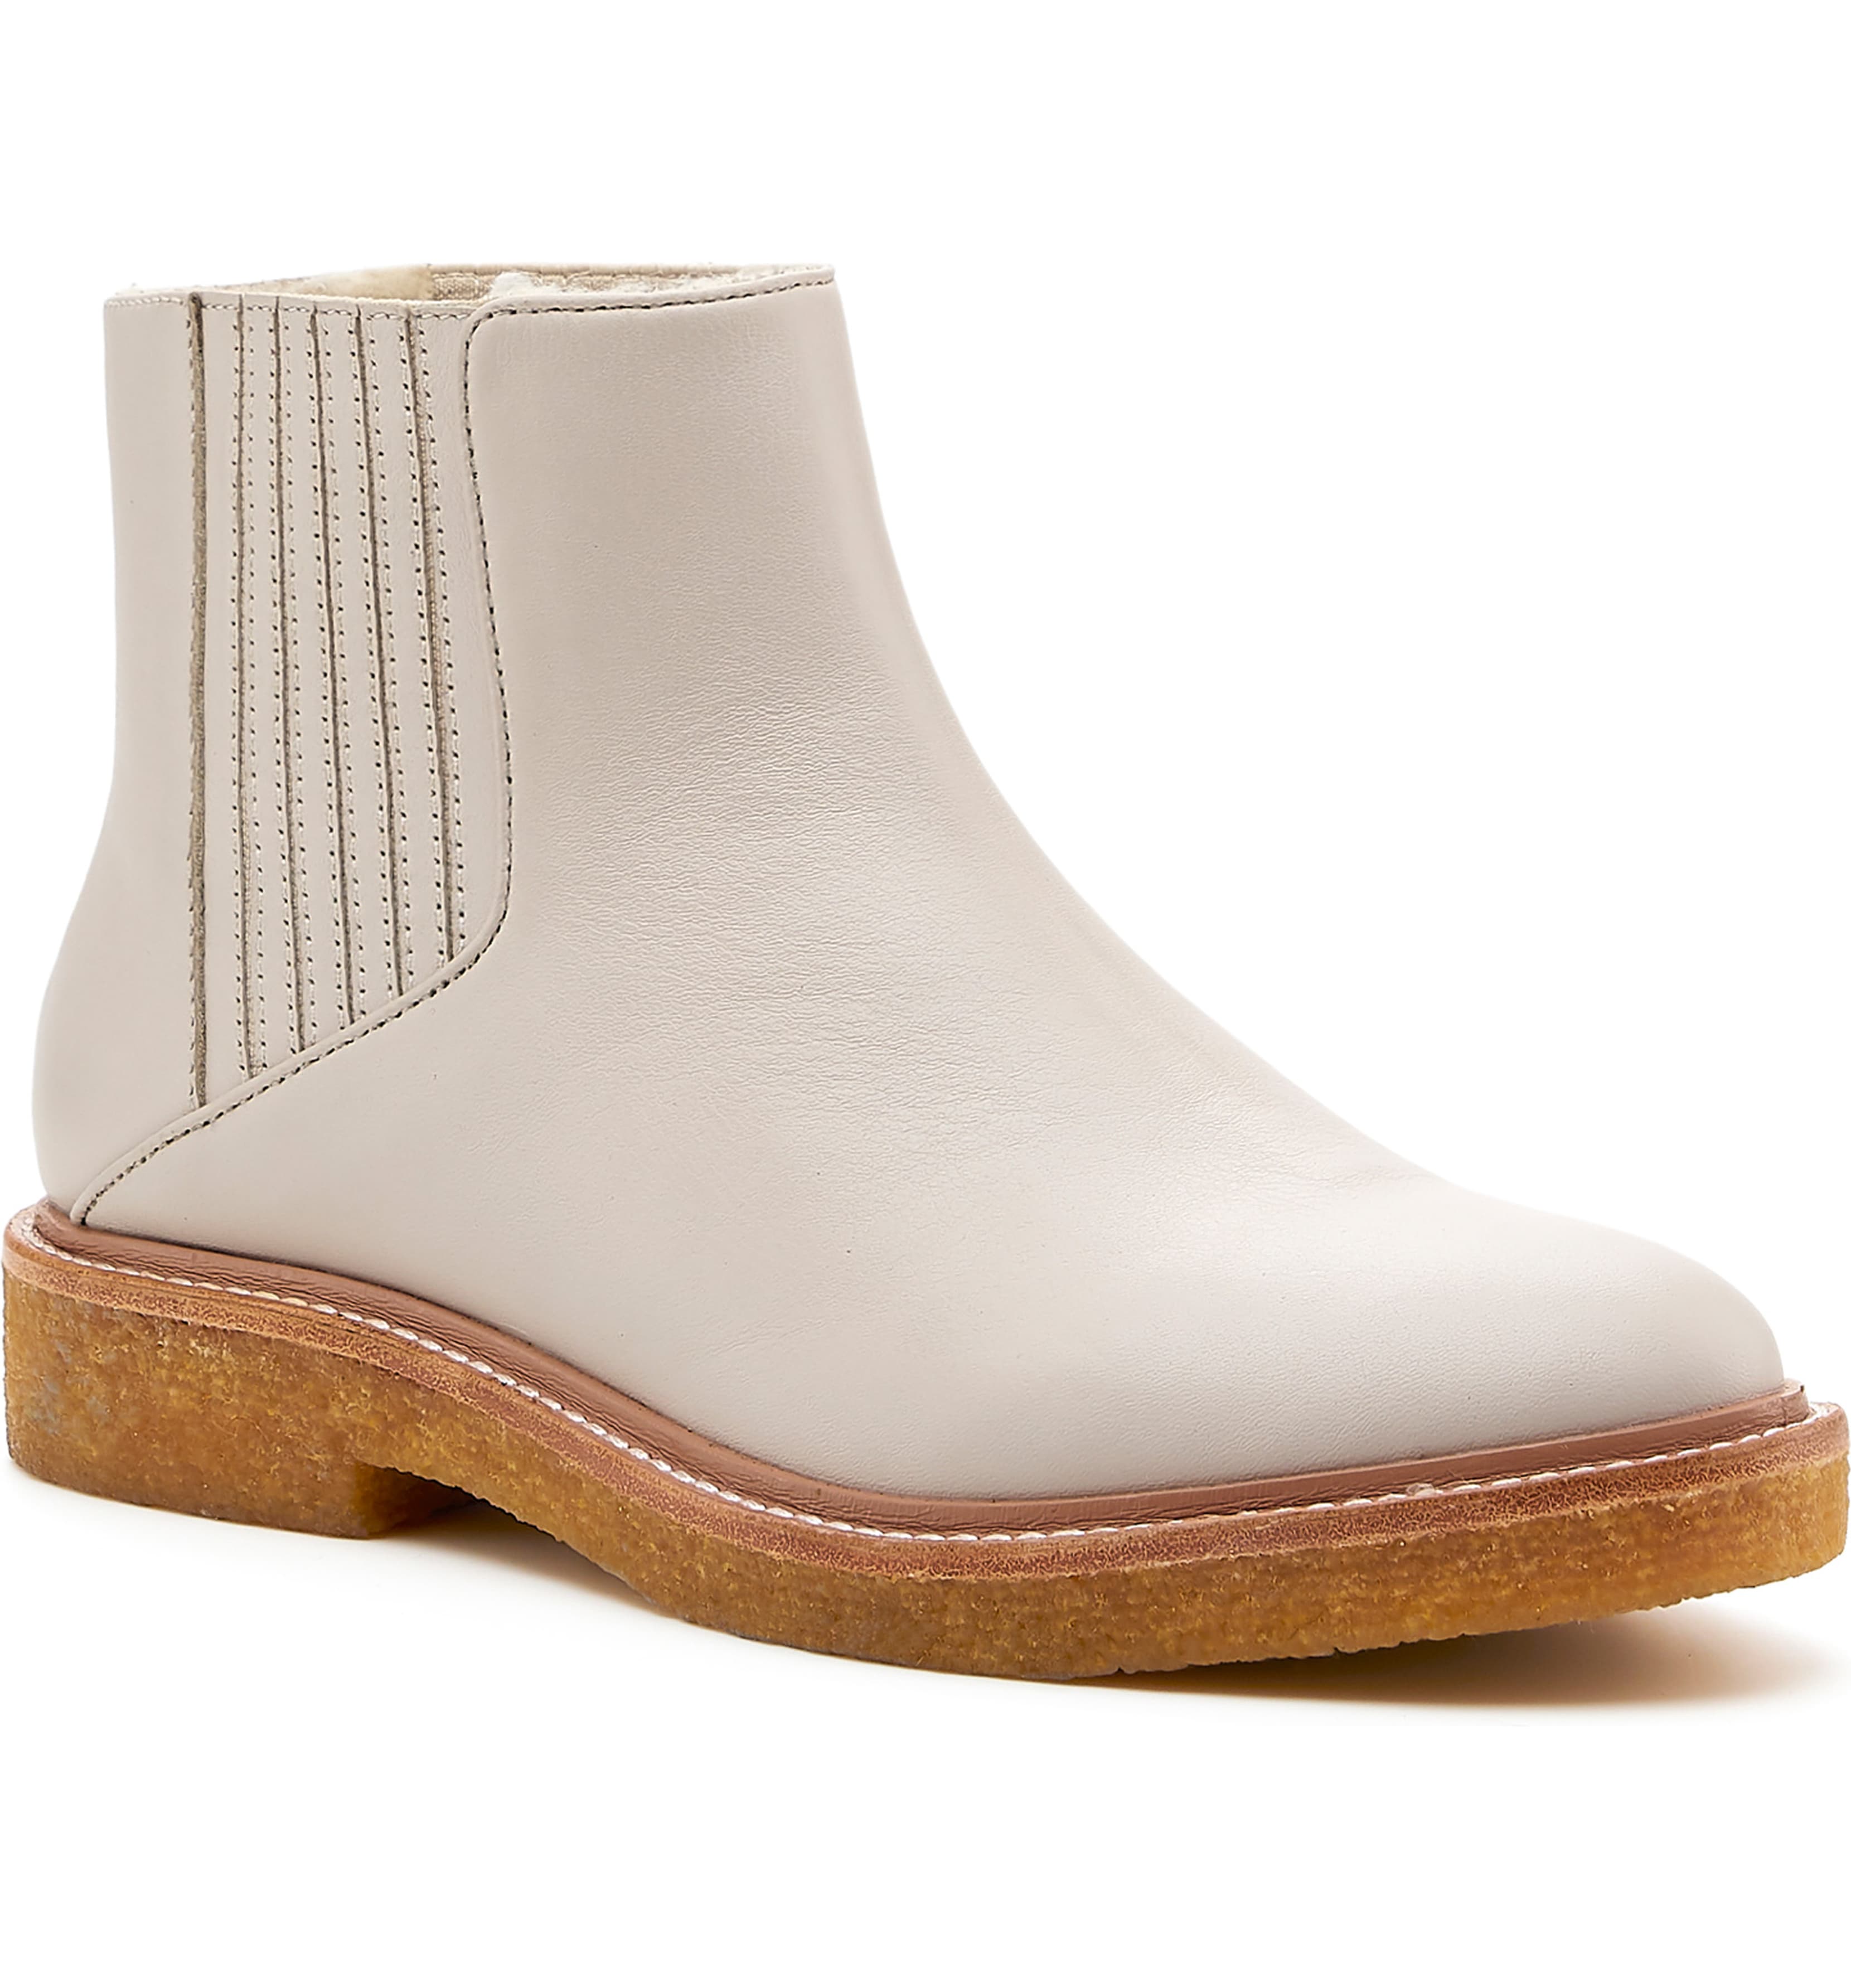 A comfortable white Chelsea boot.